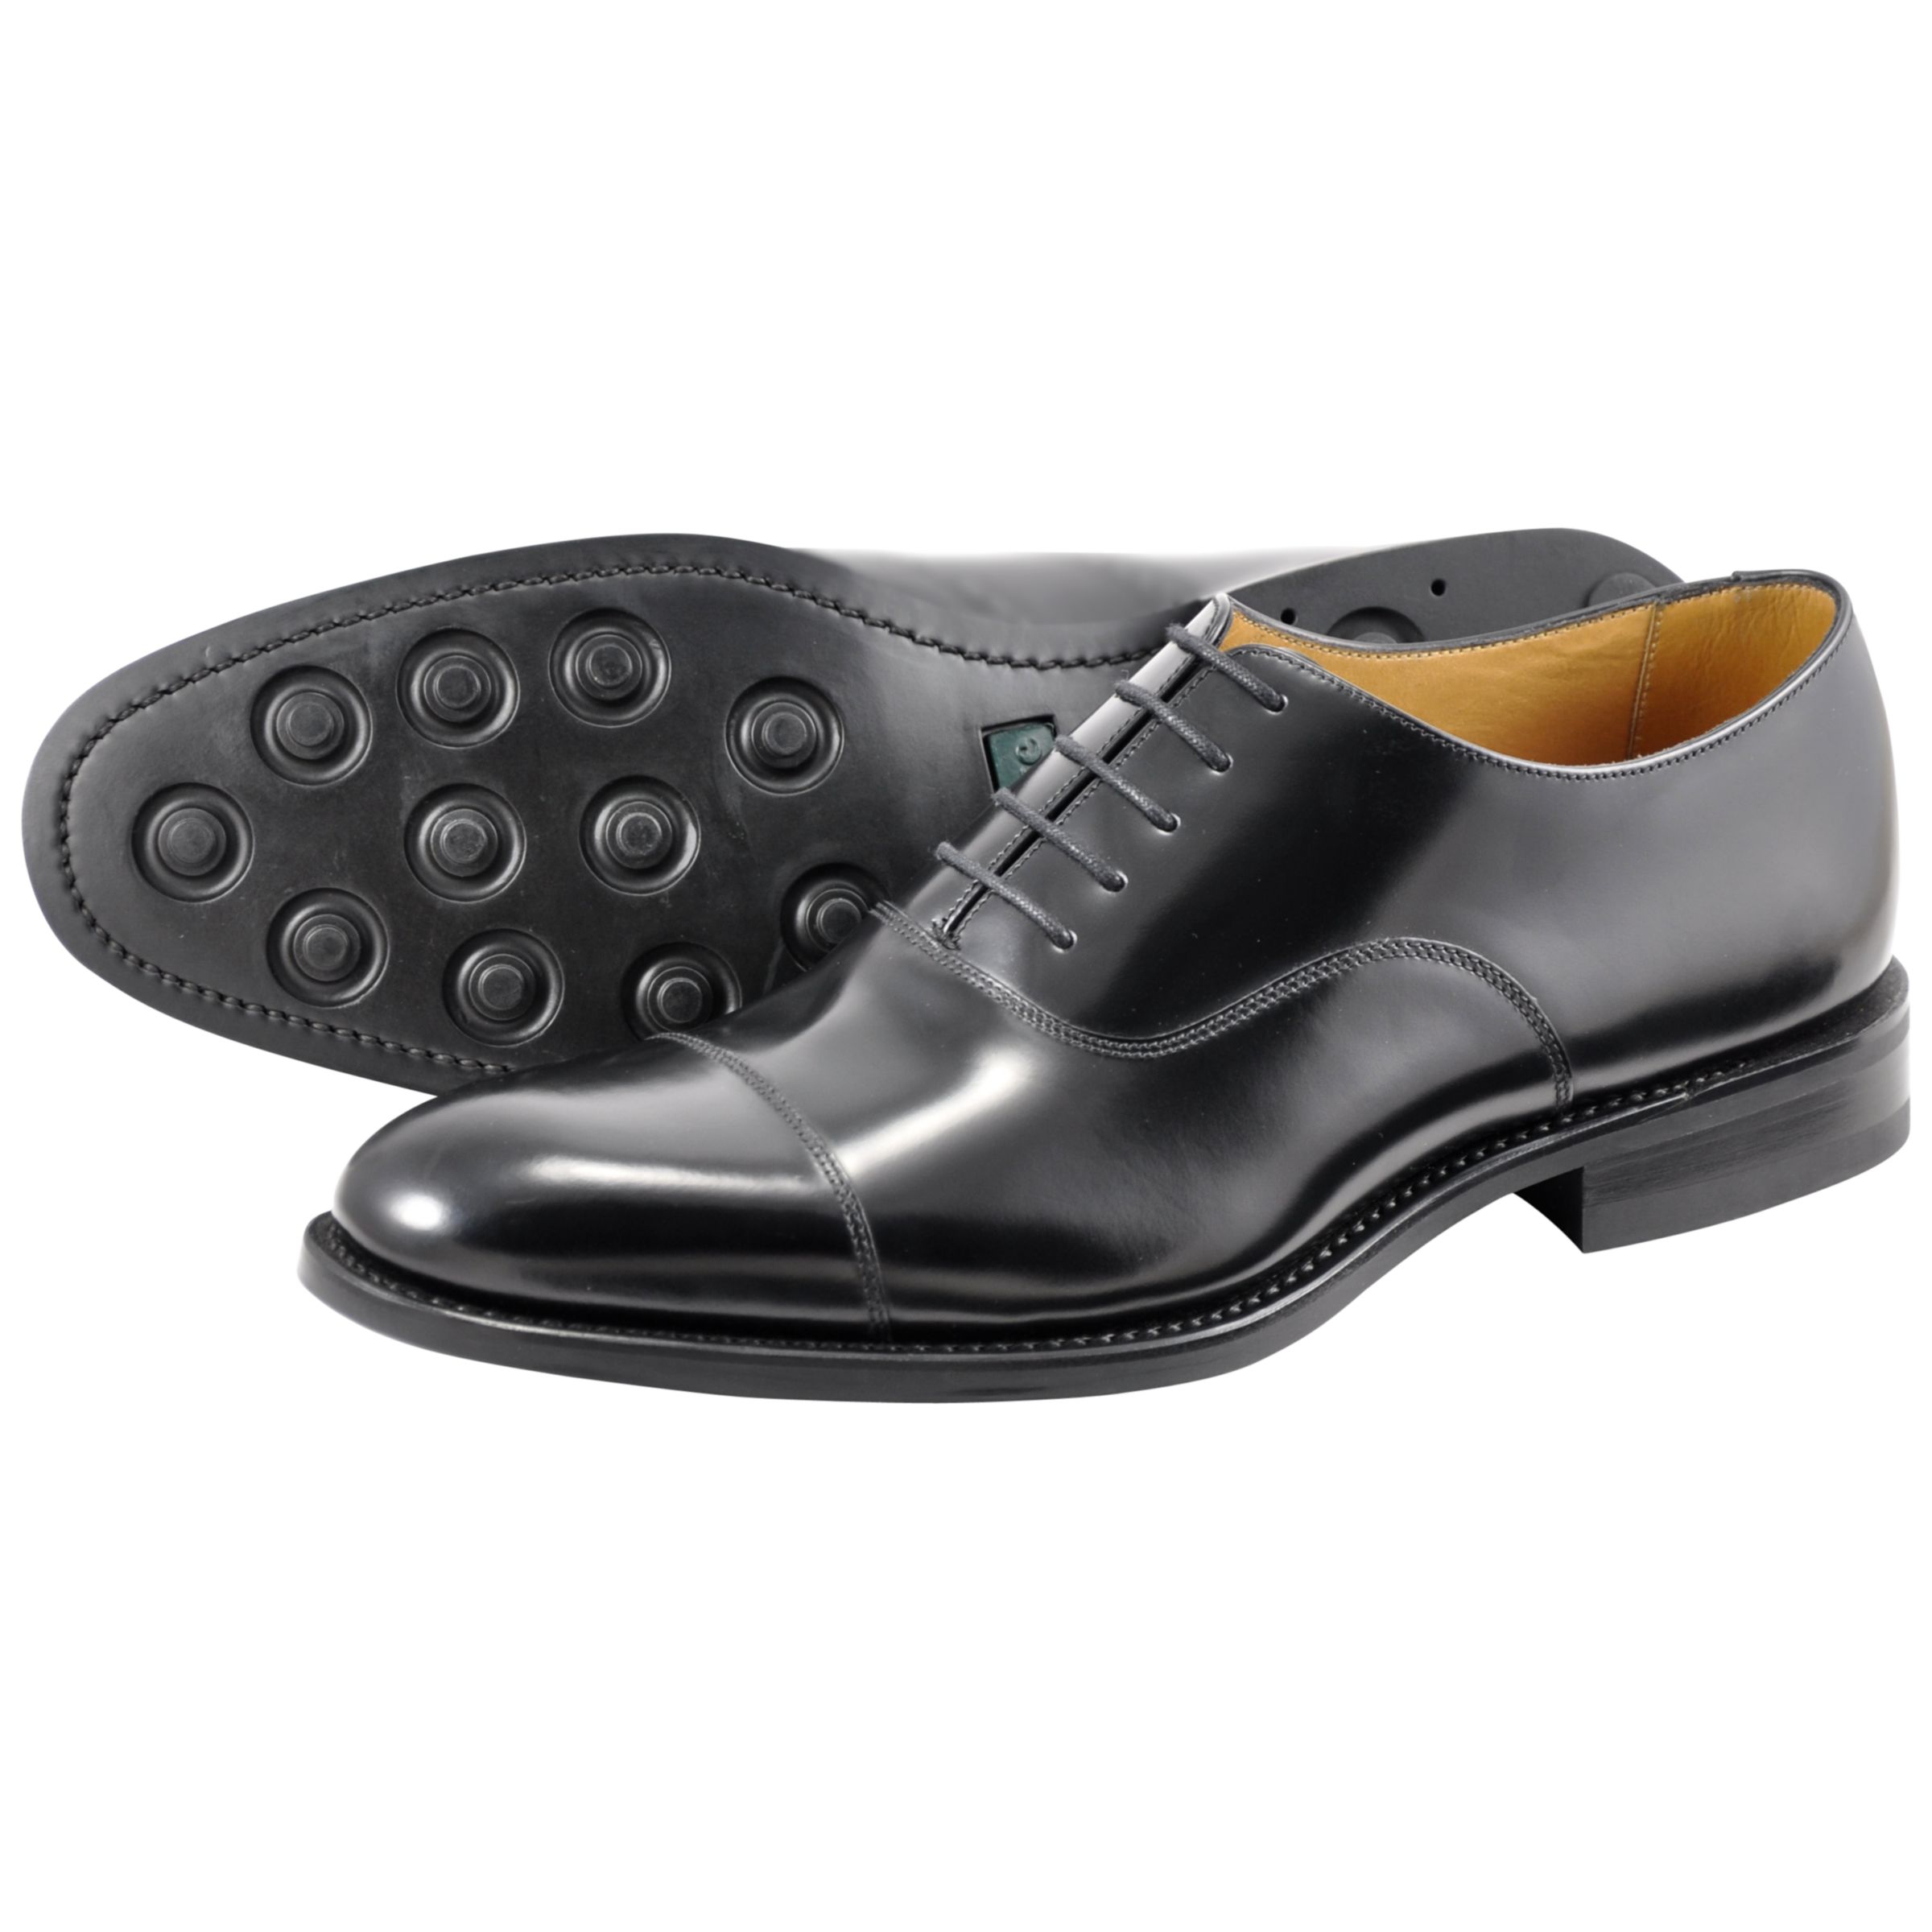 loake goodyear welted shoes